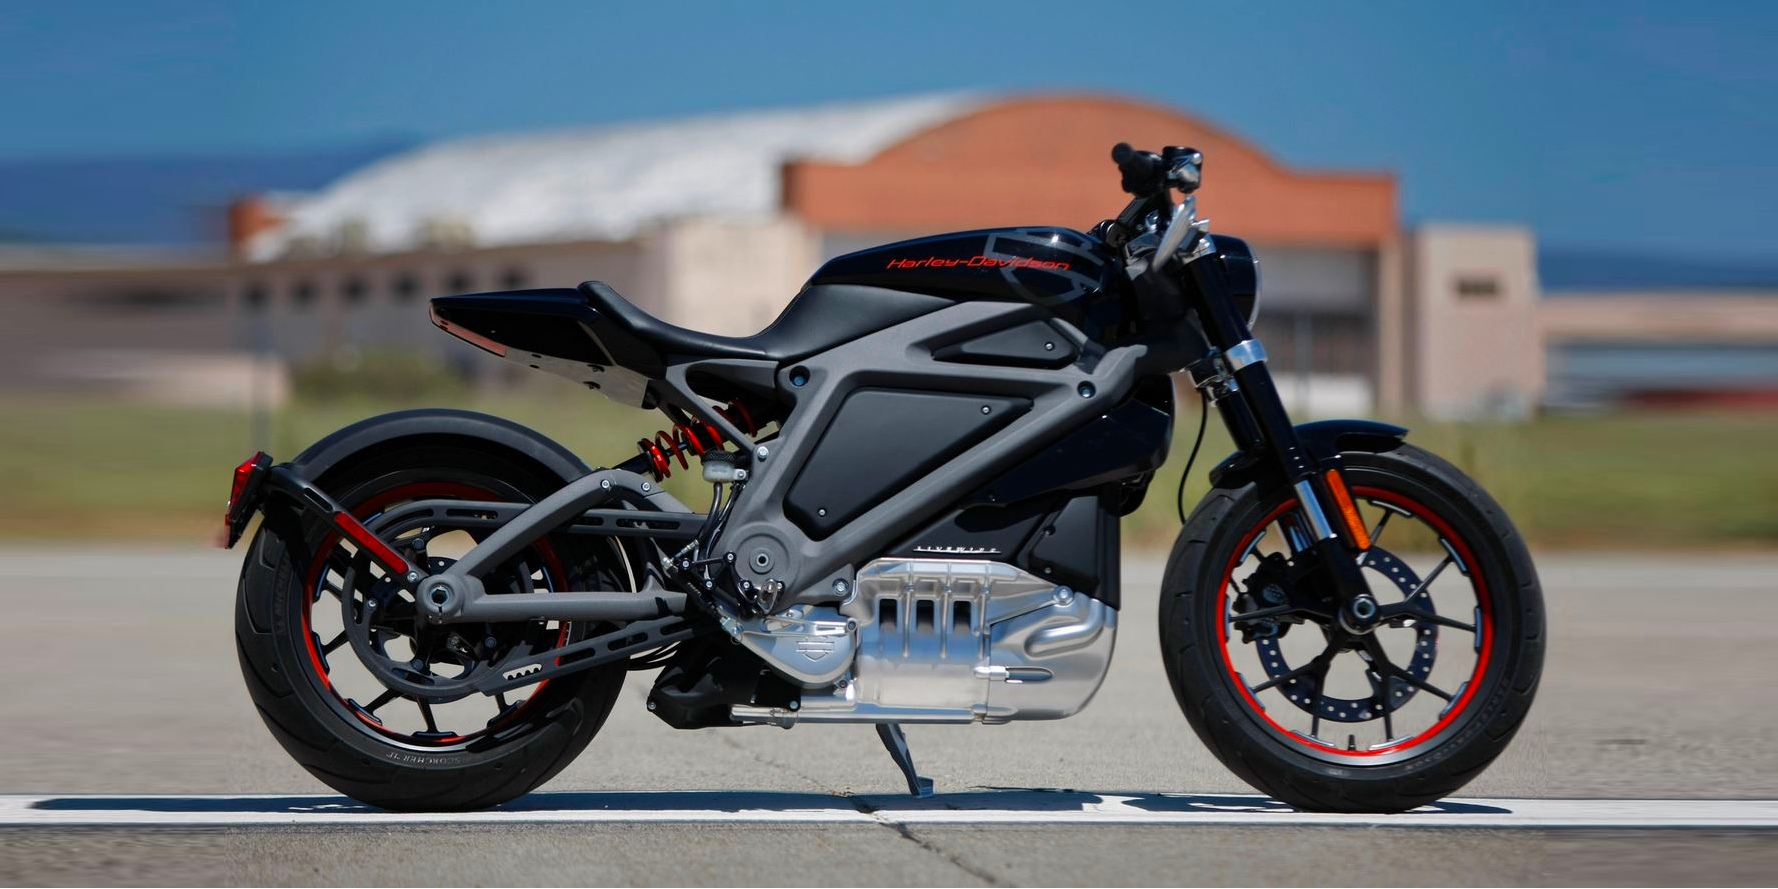 Harley Davidson's upcoming electric motorcycles seek to expand to